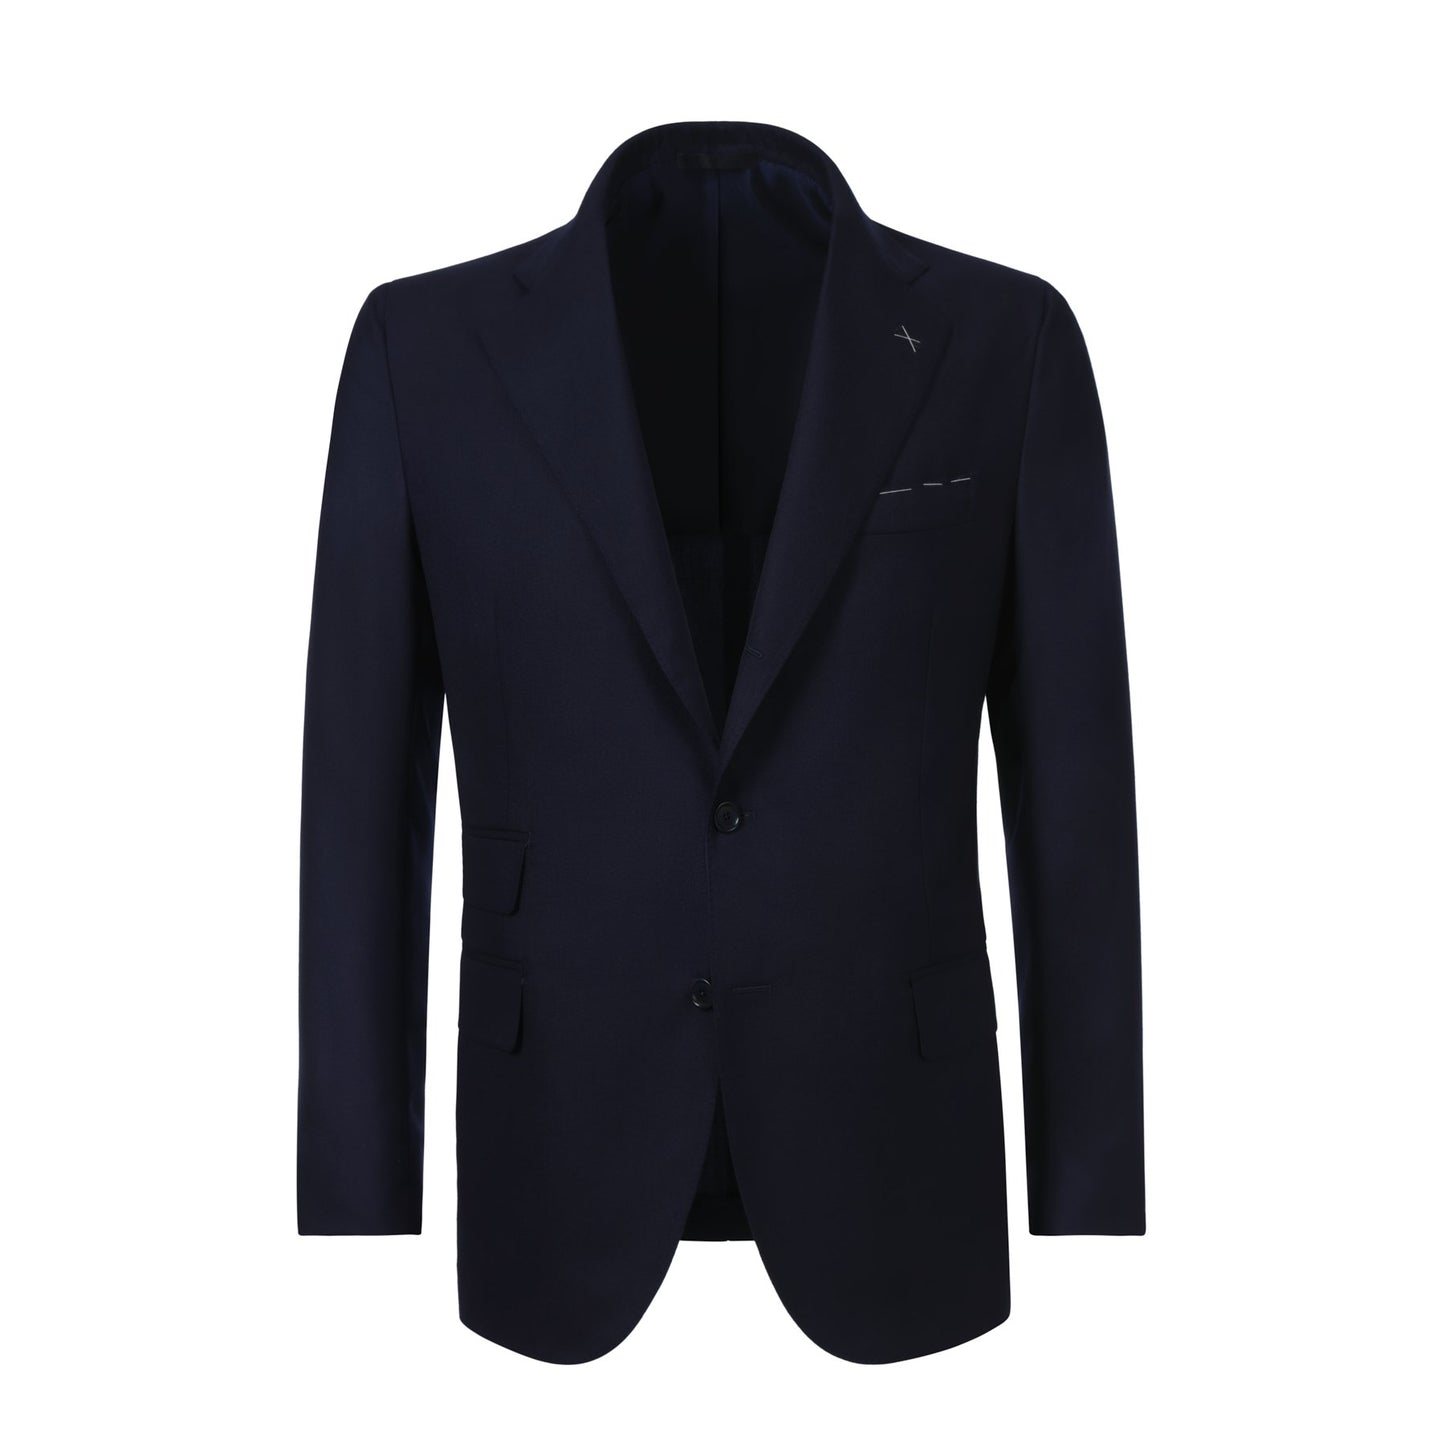 De Petrillo Single-Breasted Wool and Cashmere-Blend Suit in Dark Blue. Exclusively Made for Sartale - SARTALE